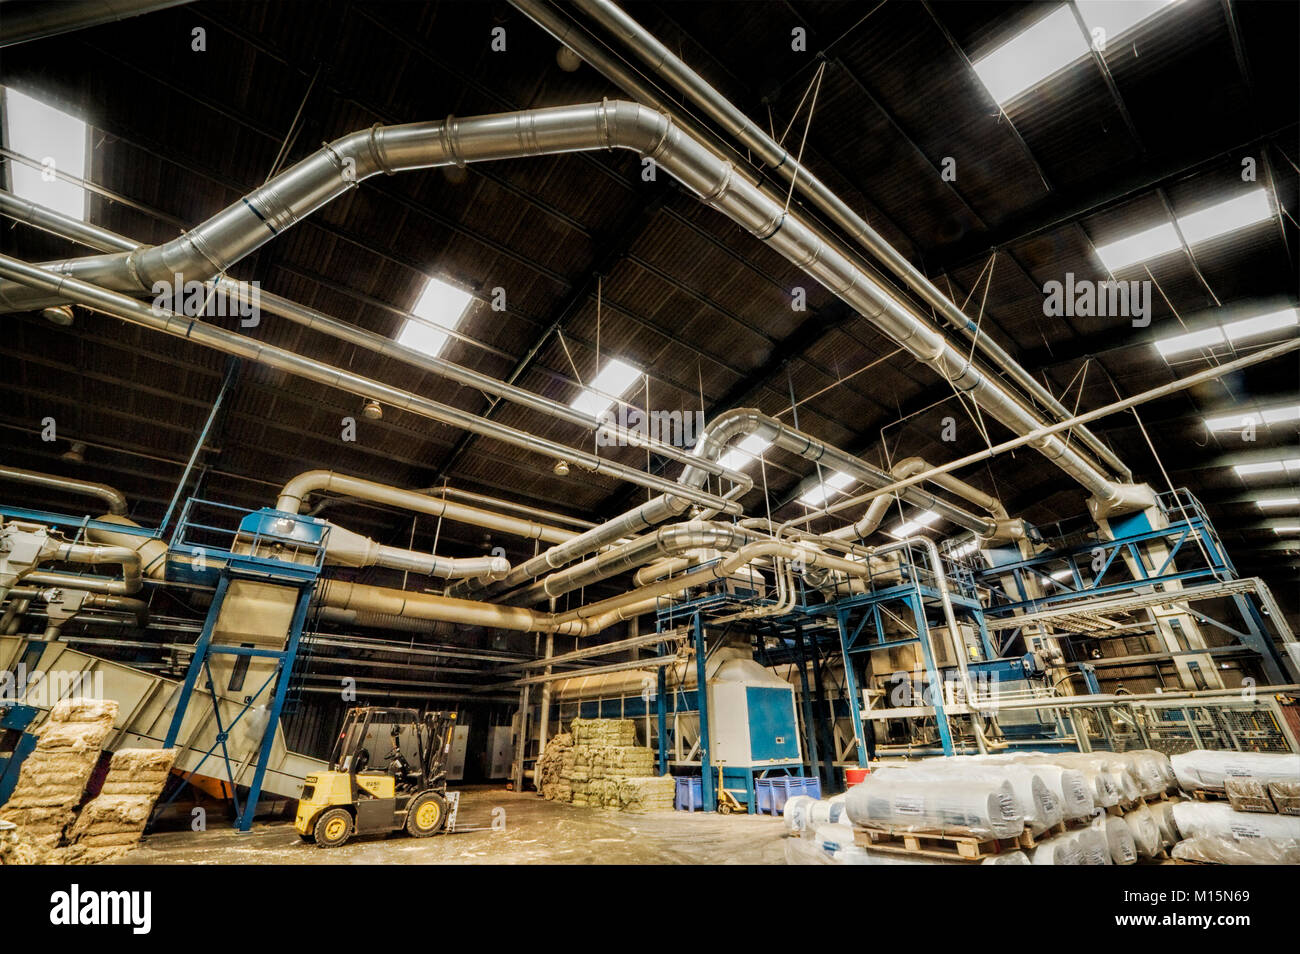 Air conditioning and dust control pipework in a UK plant processing hemp fibre. Stock Photo